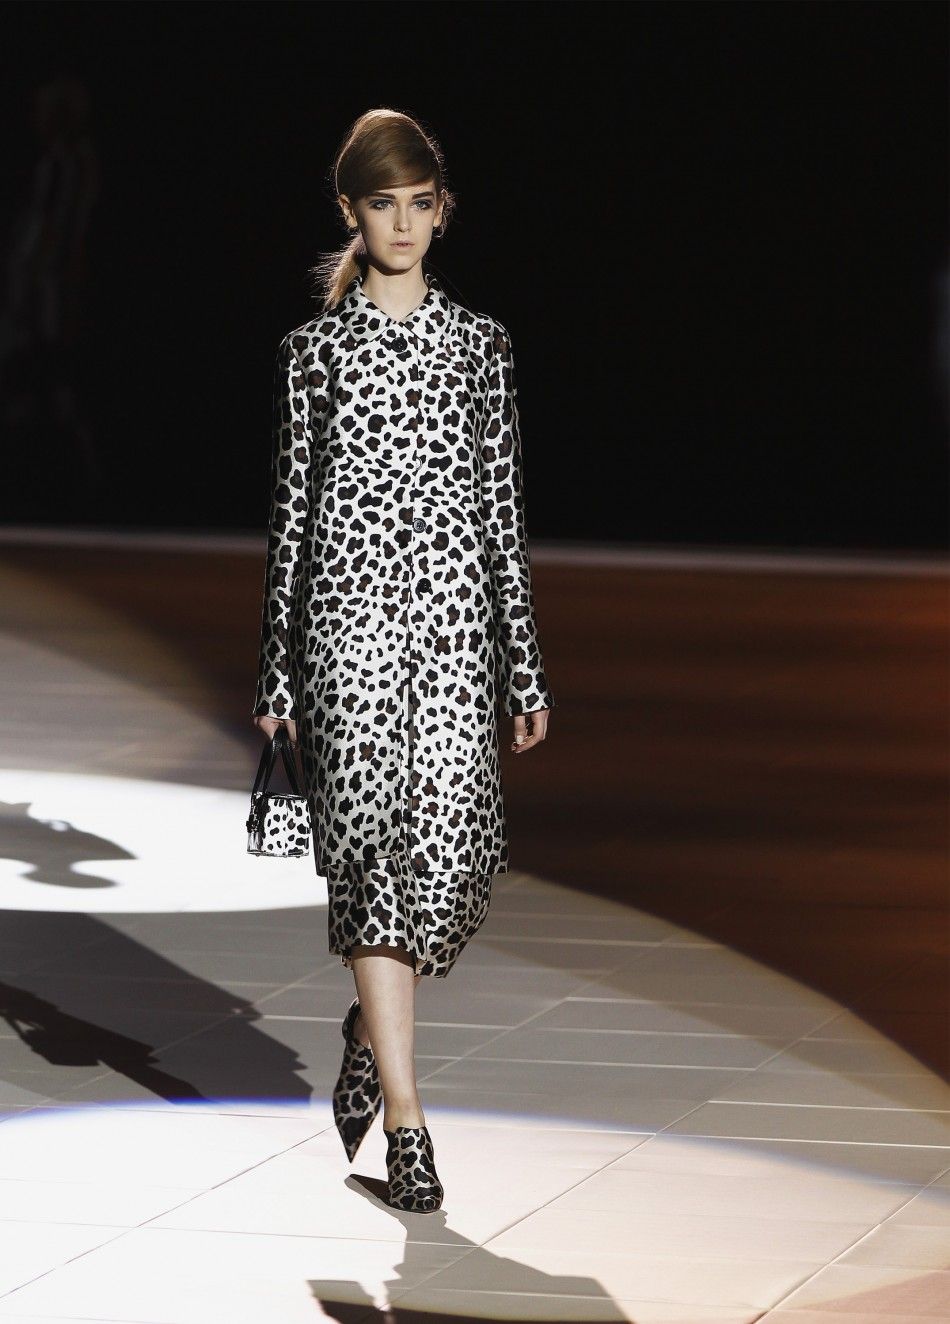 Marc Jacobs Spring 2013 show at Mercedes-Benz Fashion Week in New York